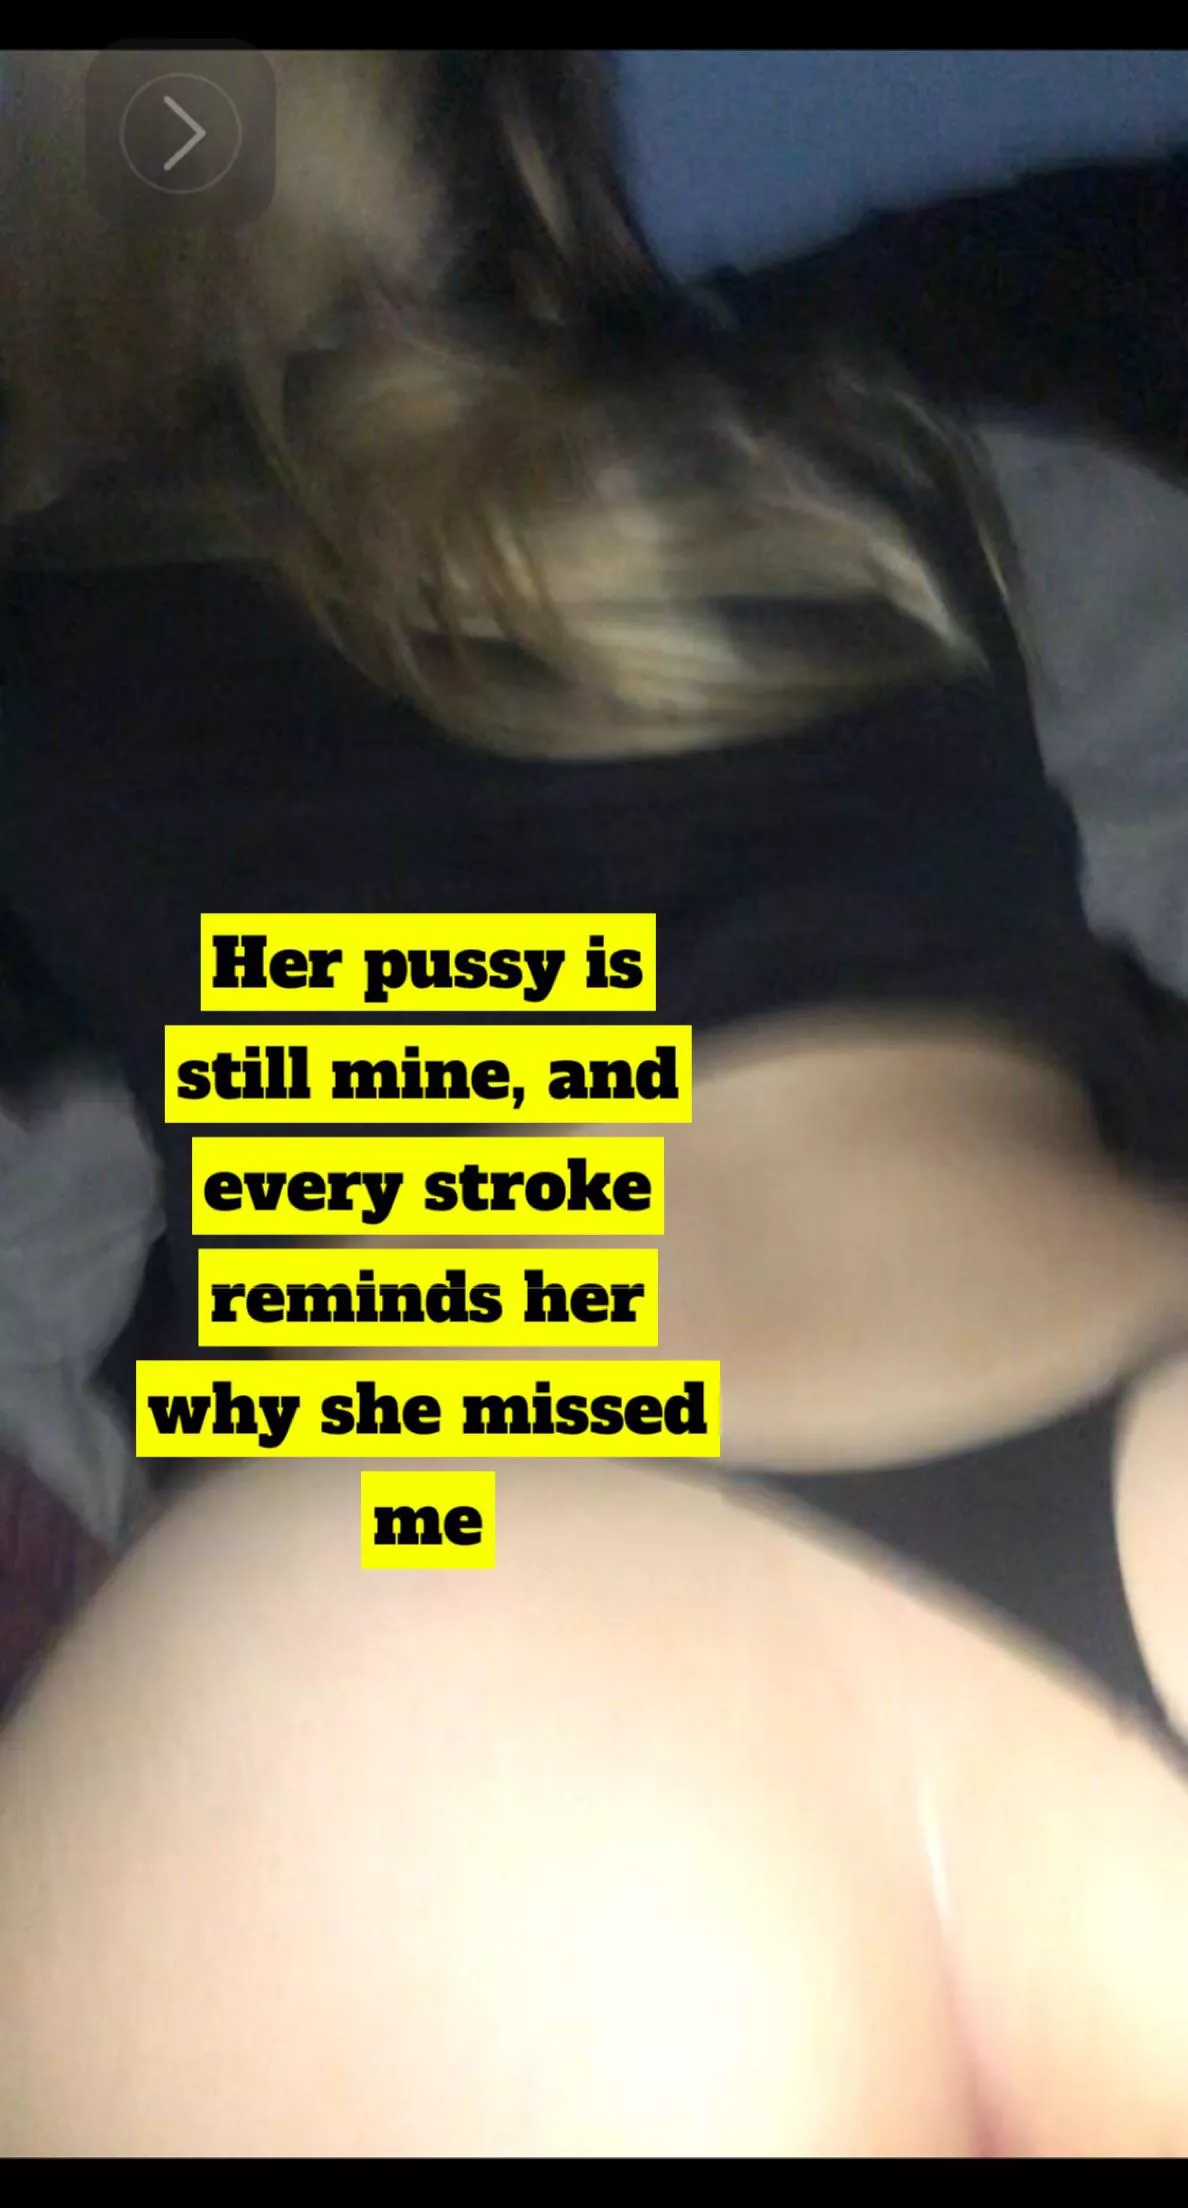 Boyfriend wanted me to fuck other guys, so I fucked the guy that took my virginity